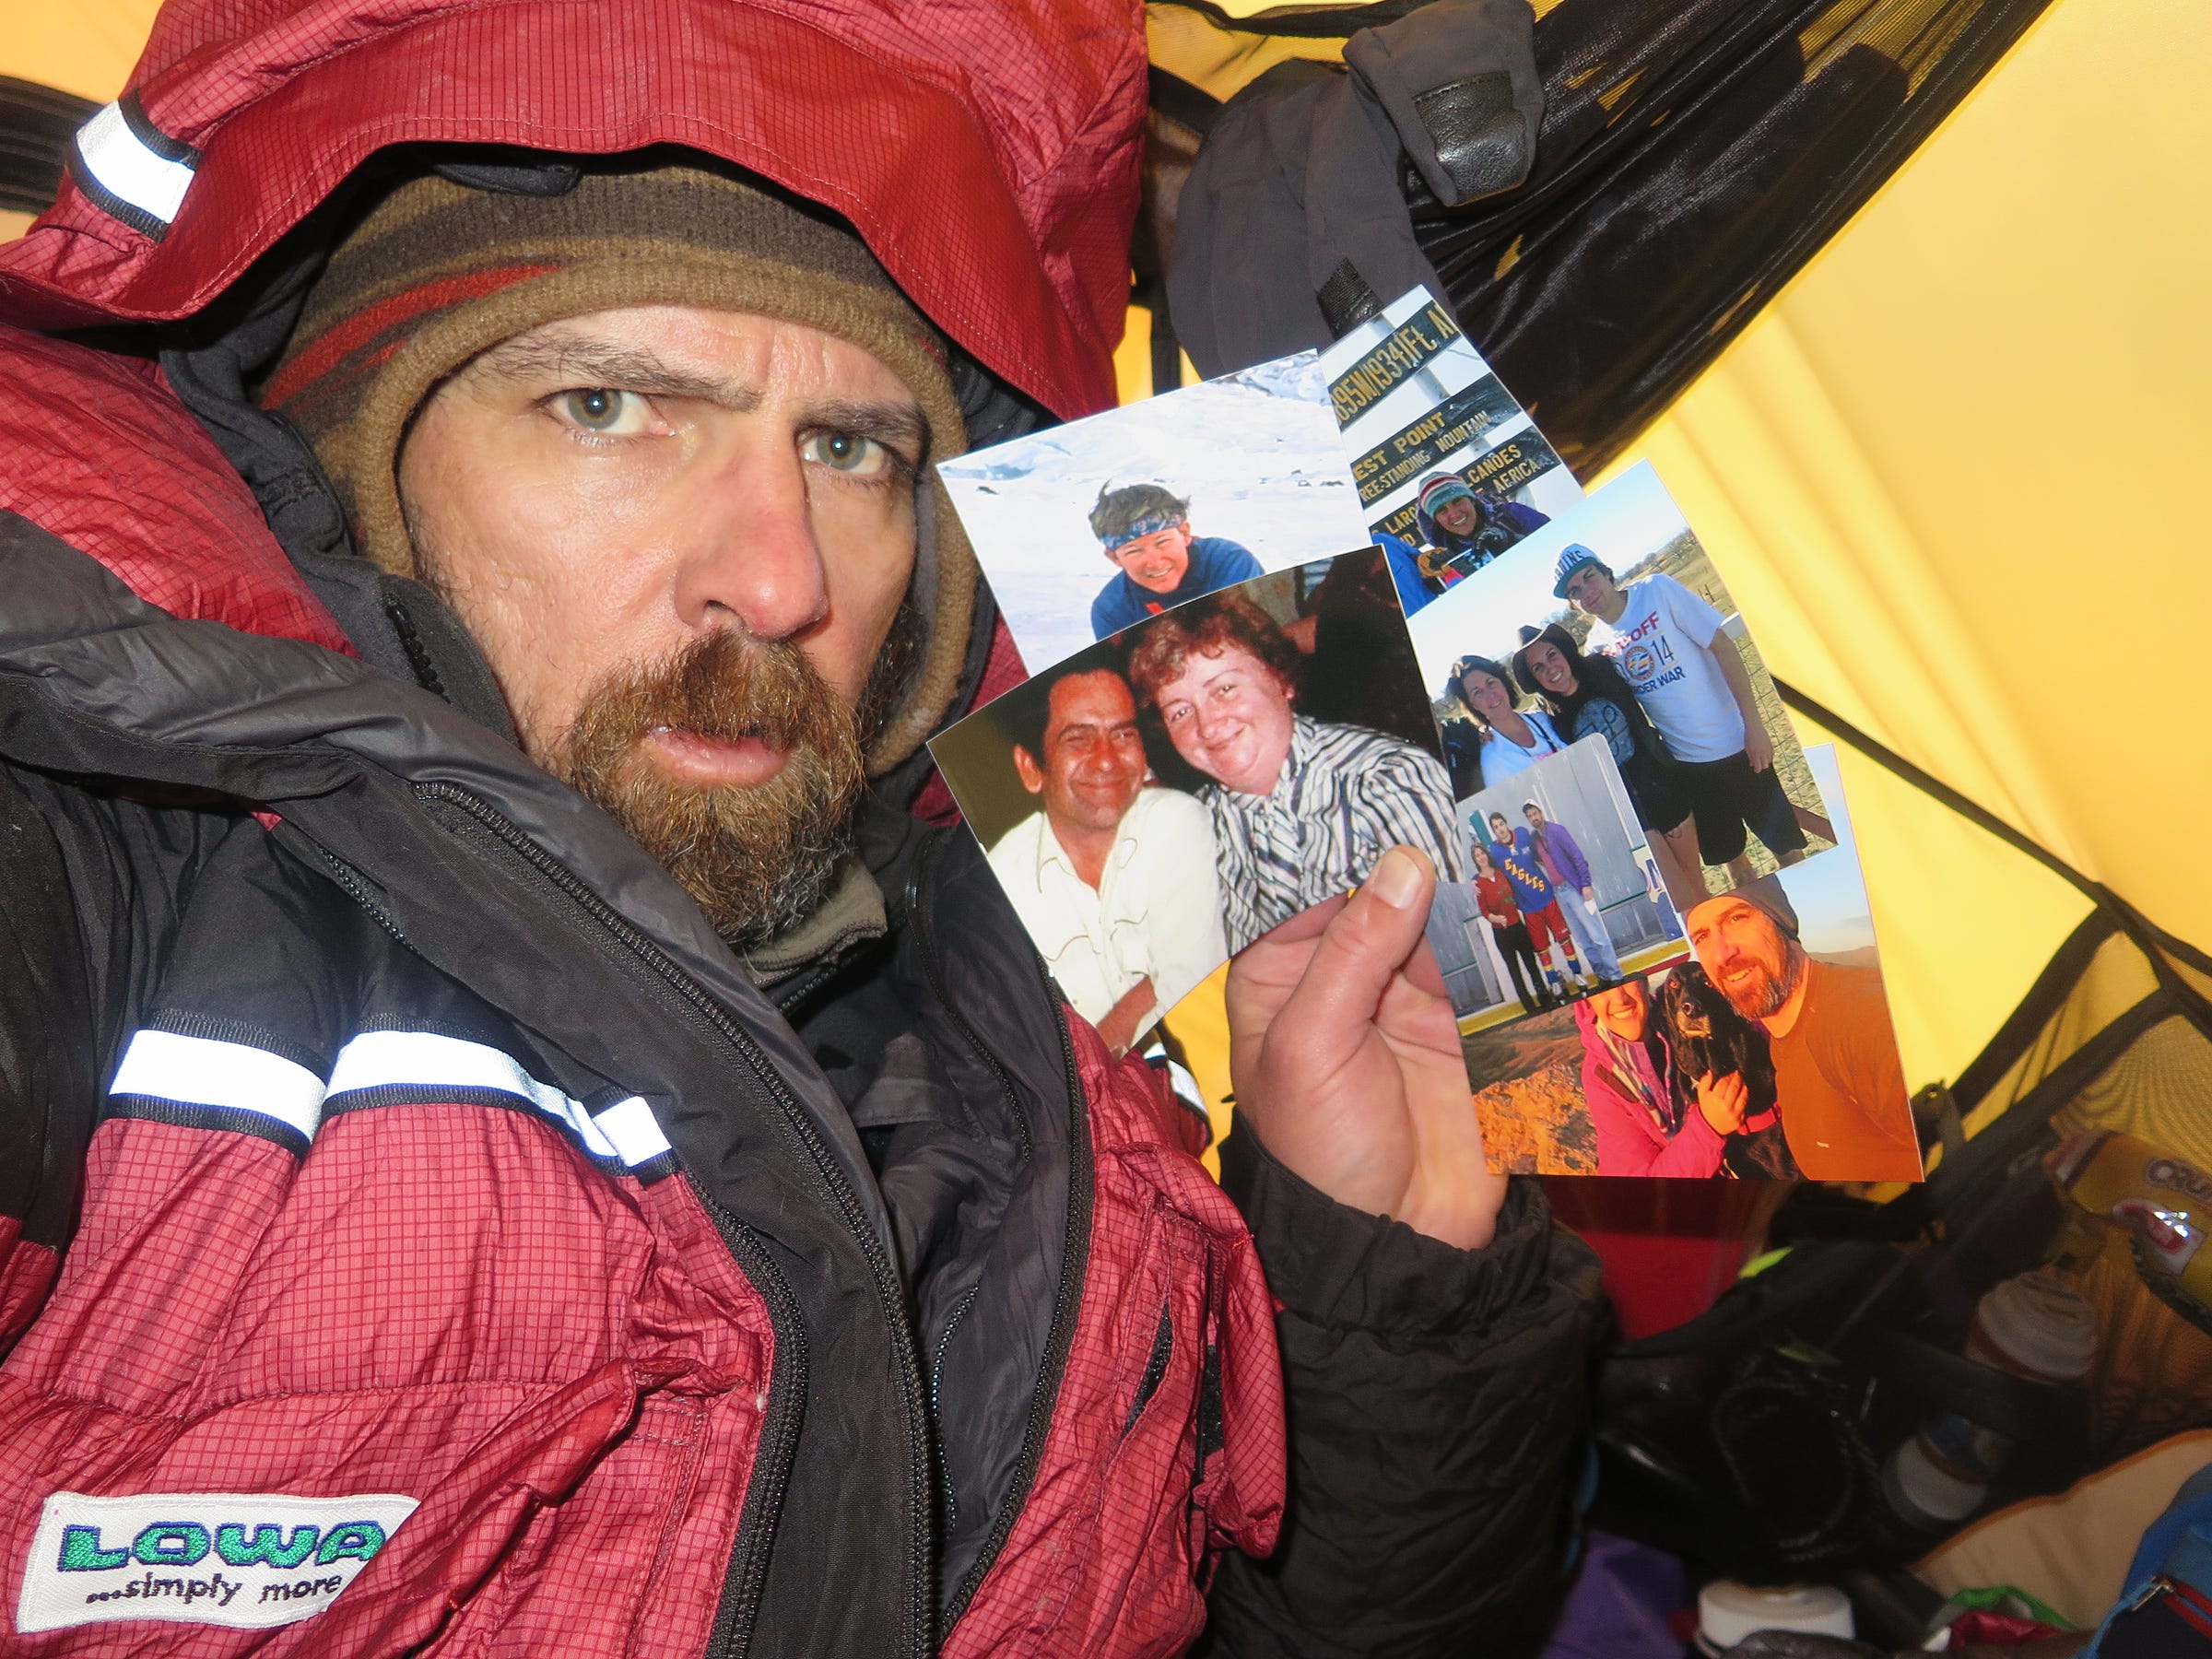 Jim Davidson holding aloft pictures of his family soon after experiencing the 7.8-magnitude earthquake and avalanches at Camp One (19,700 feet) on Everest.